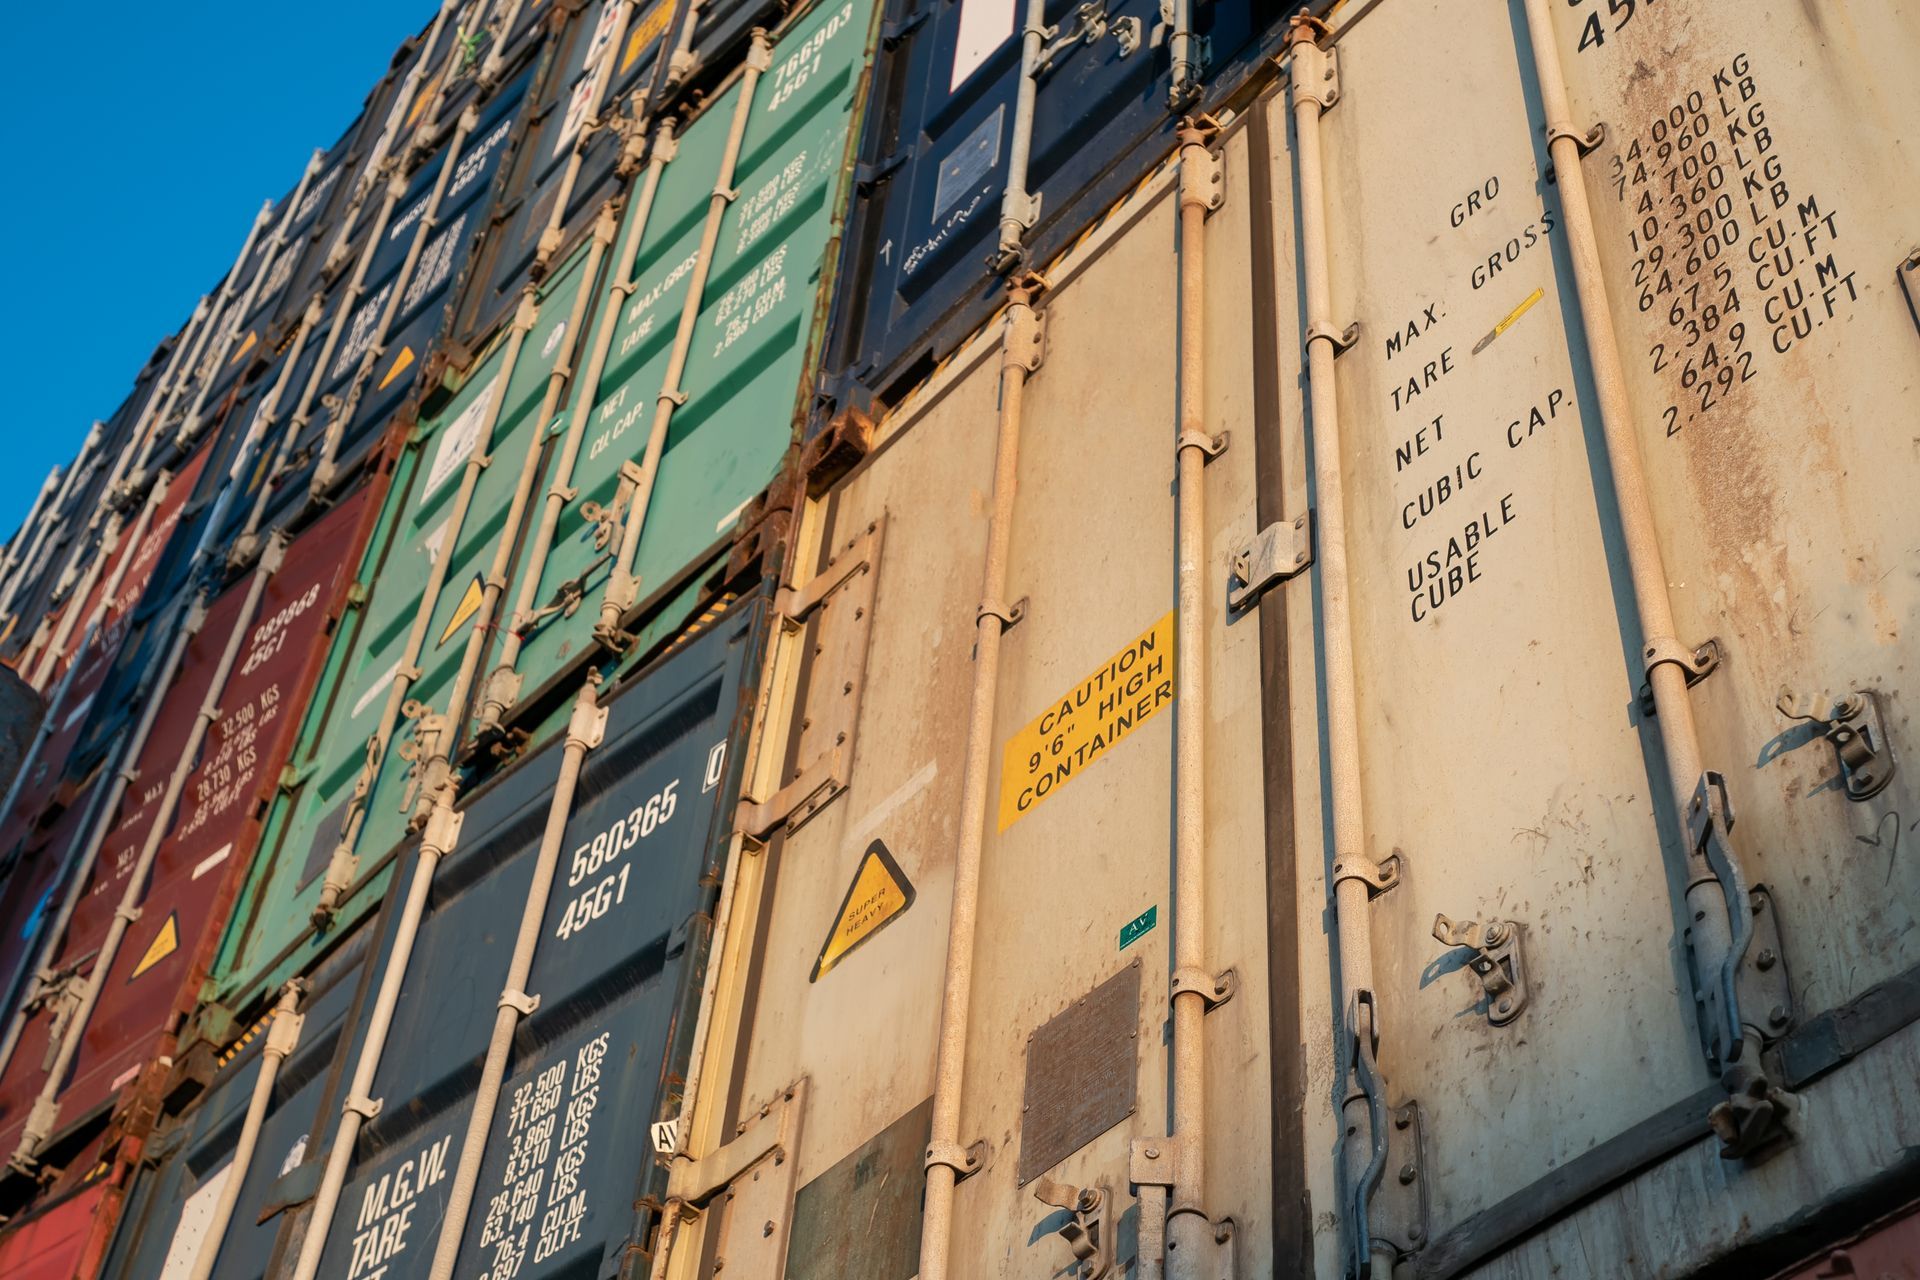 When shipments suffer damage, the consequences reverberate through the entire supply chain.